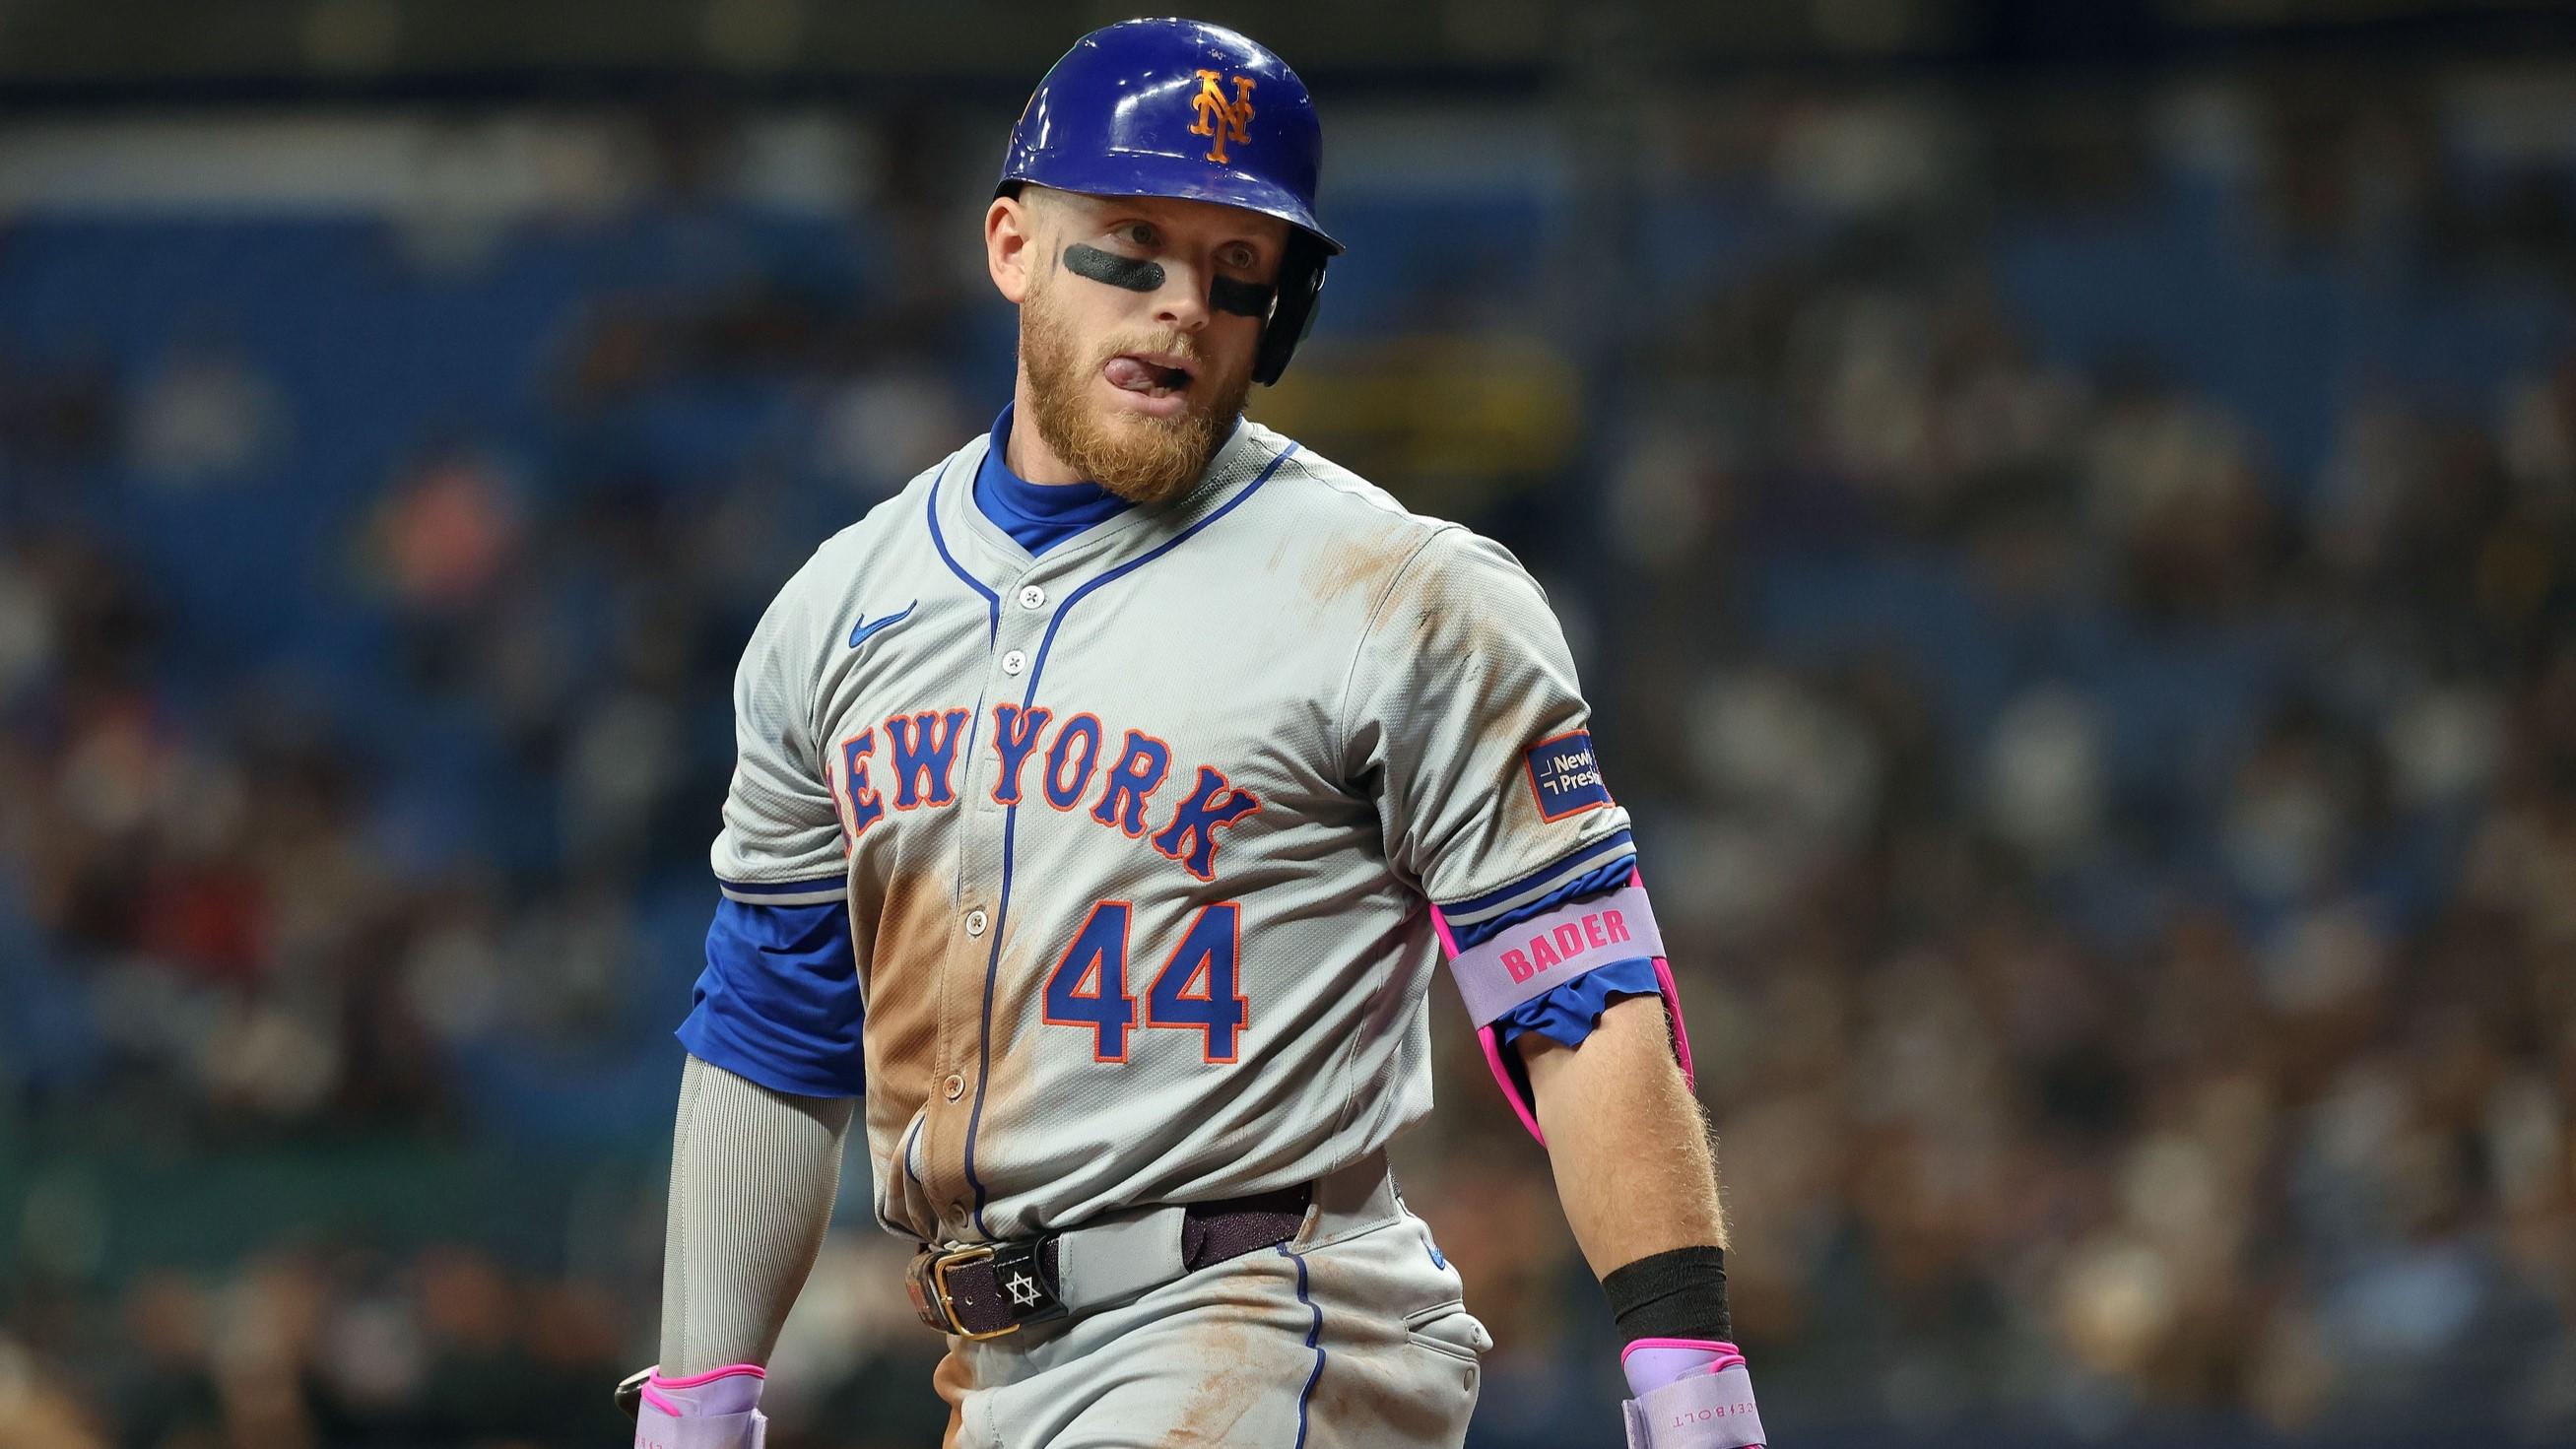 Mets' Harrison Bader exits Tuesday's game in fourth inning after crashing into fence